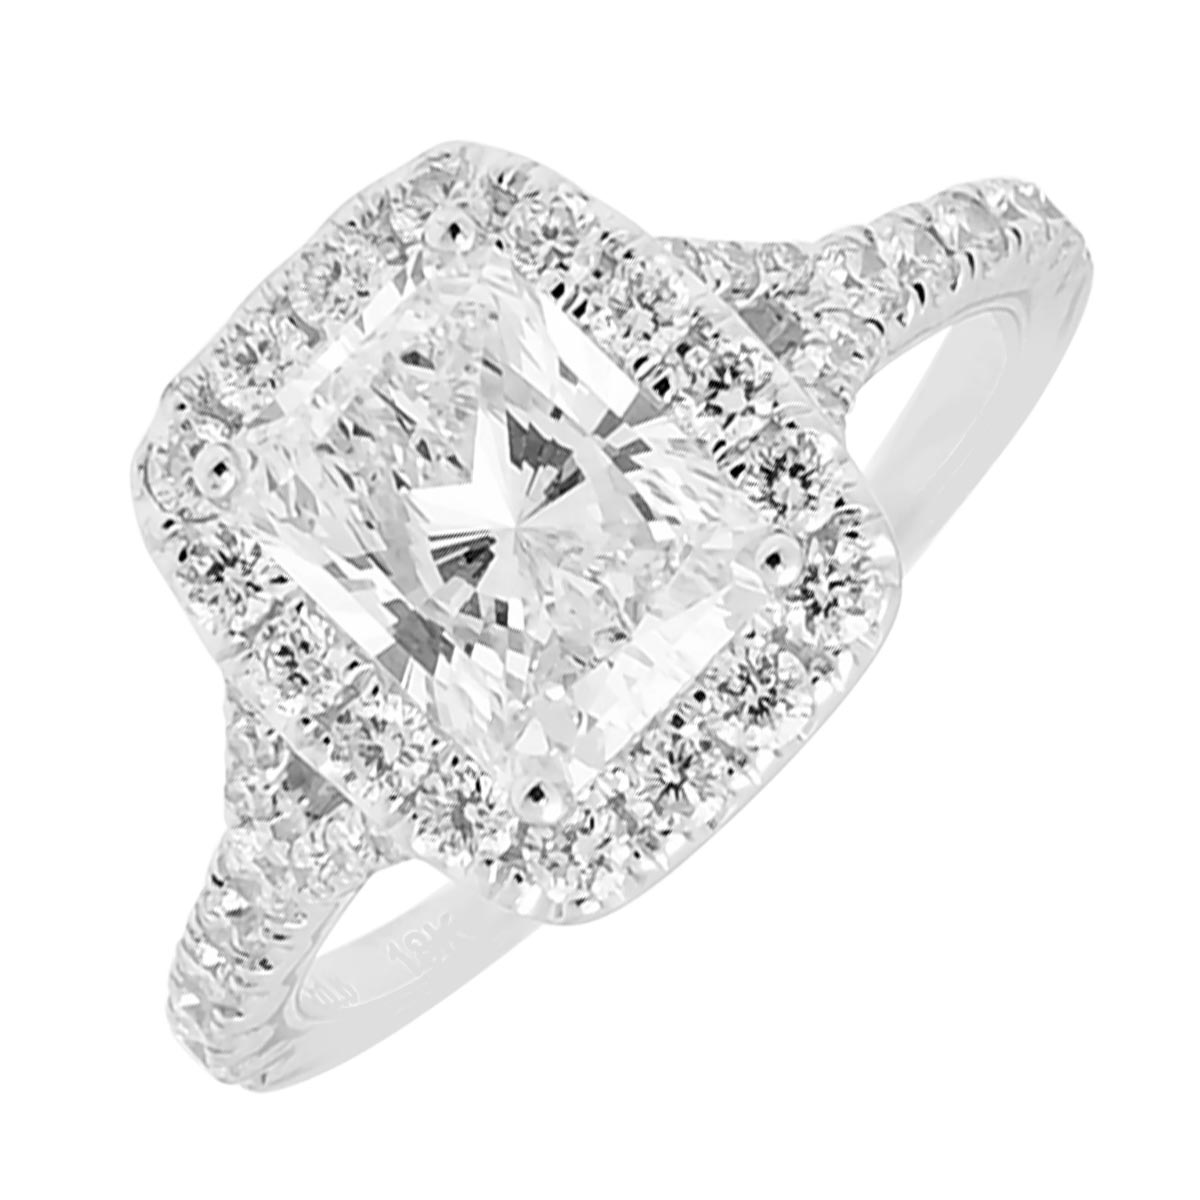 Radiant Cut Diamond Halo Engagement Ring in 18kt White Gold (2ct tw)